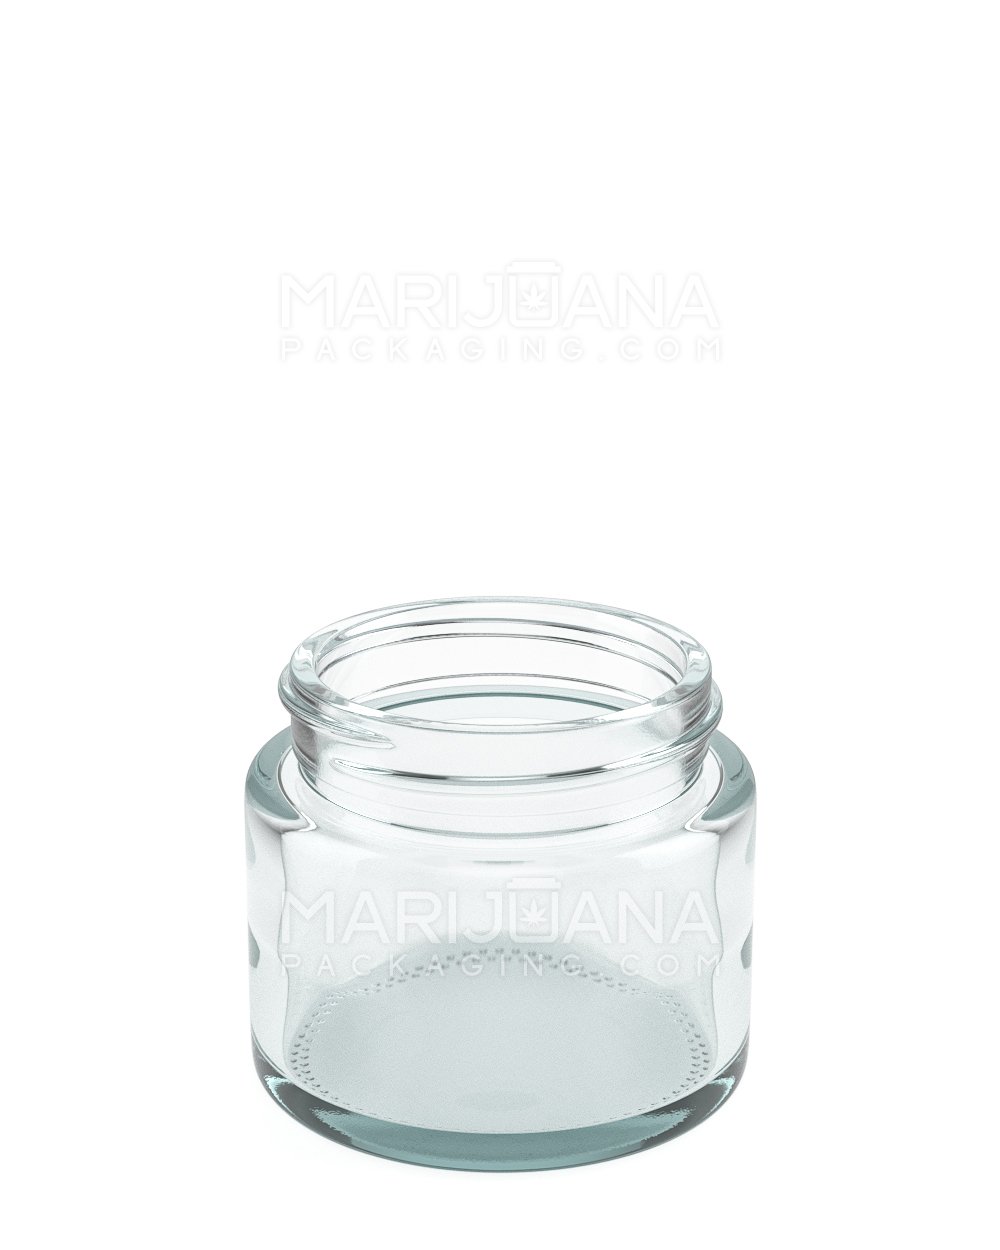 Straight Sided Clear Glass Jars | 53mm - 2.5oz - 84 Count - 2